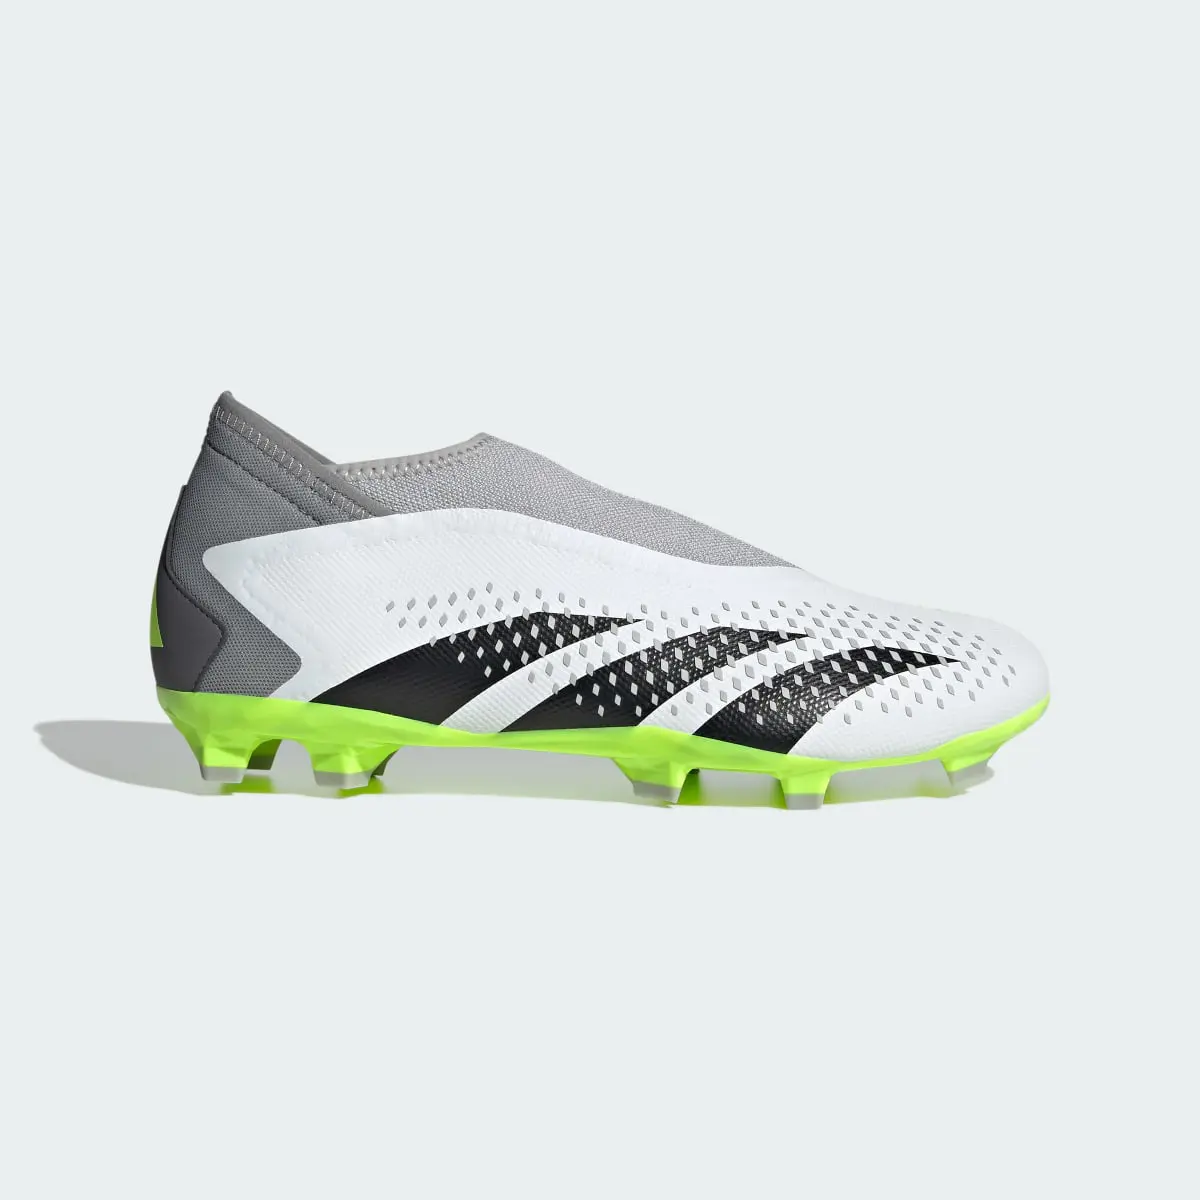 Adidas Predator Accuracy.3 Laceless Firm Ground Soccer Cleats. 2